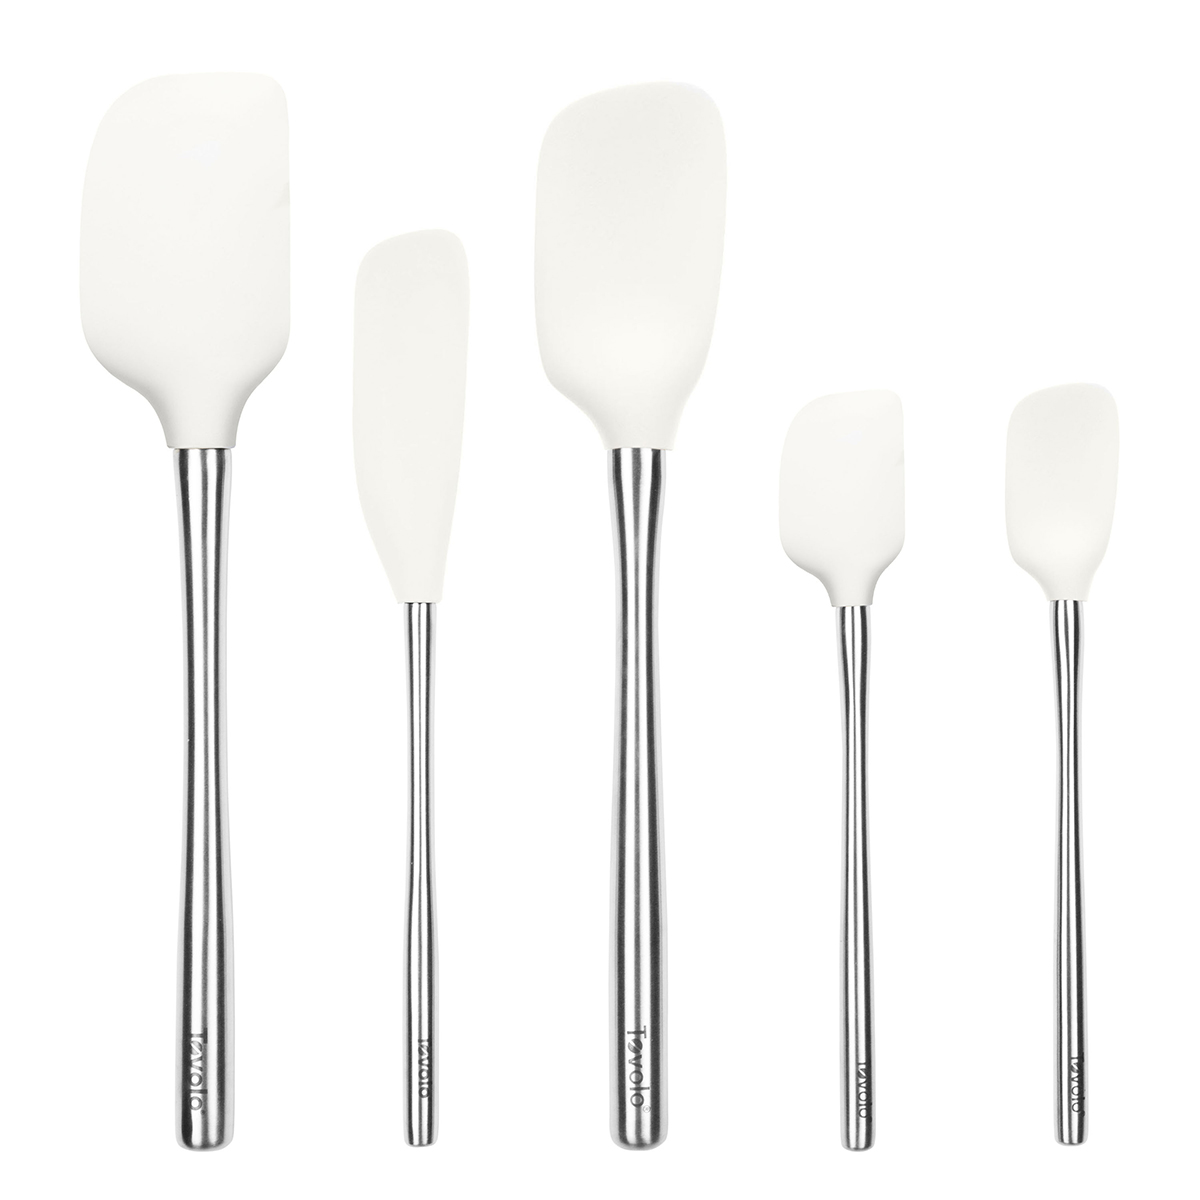 Tovolo Flex-Core Stainless Steel Handled 5-Piece Spatula Set (Oyster Gray)